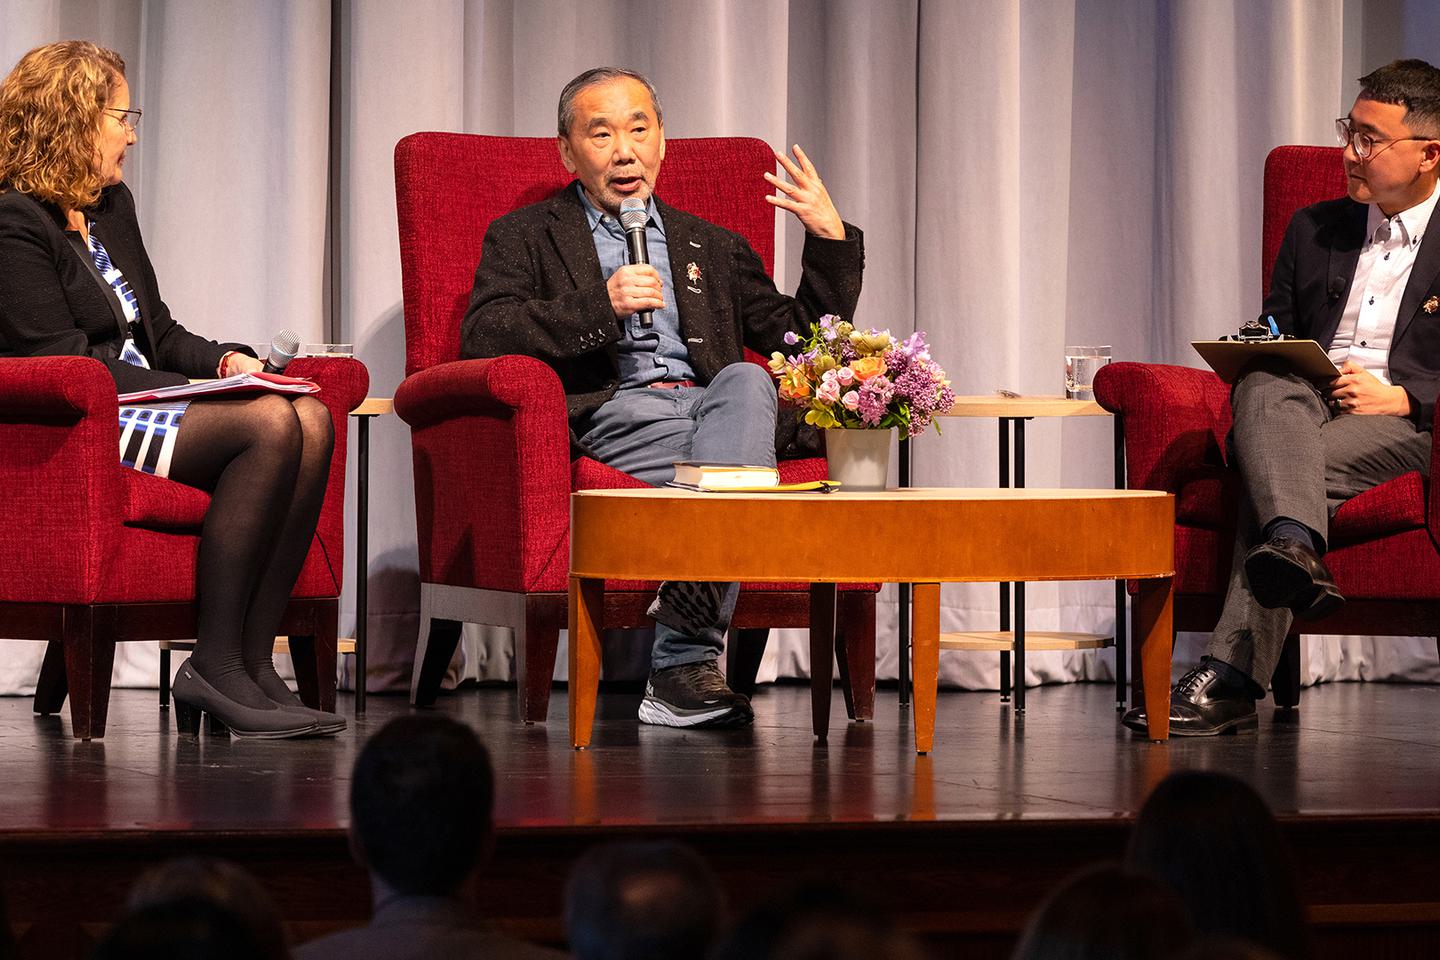 Haruki Murakami seated on stage and holding a microphone to answer a question.